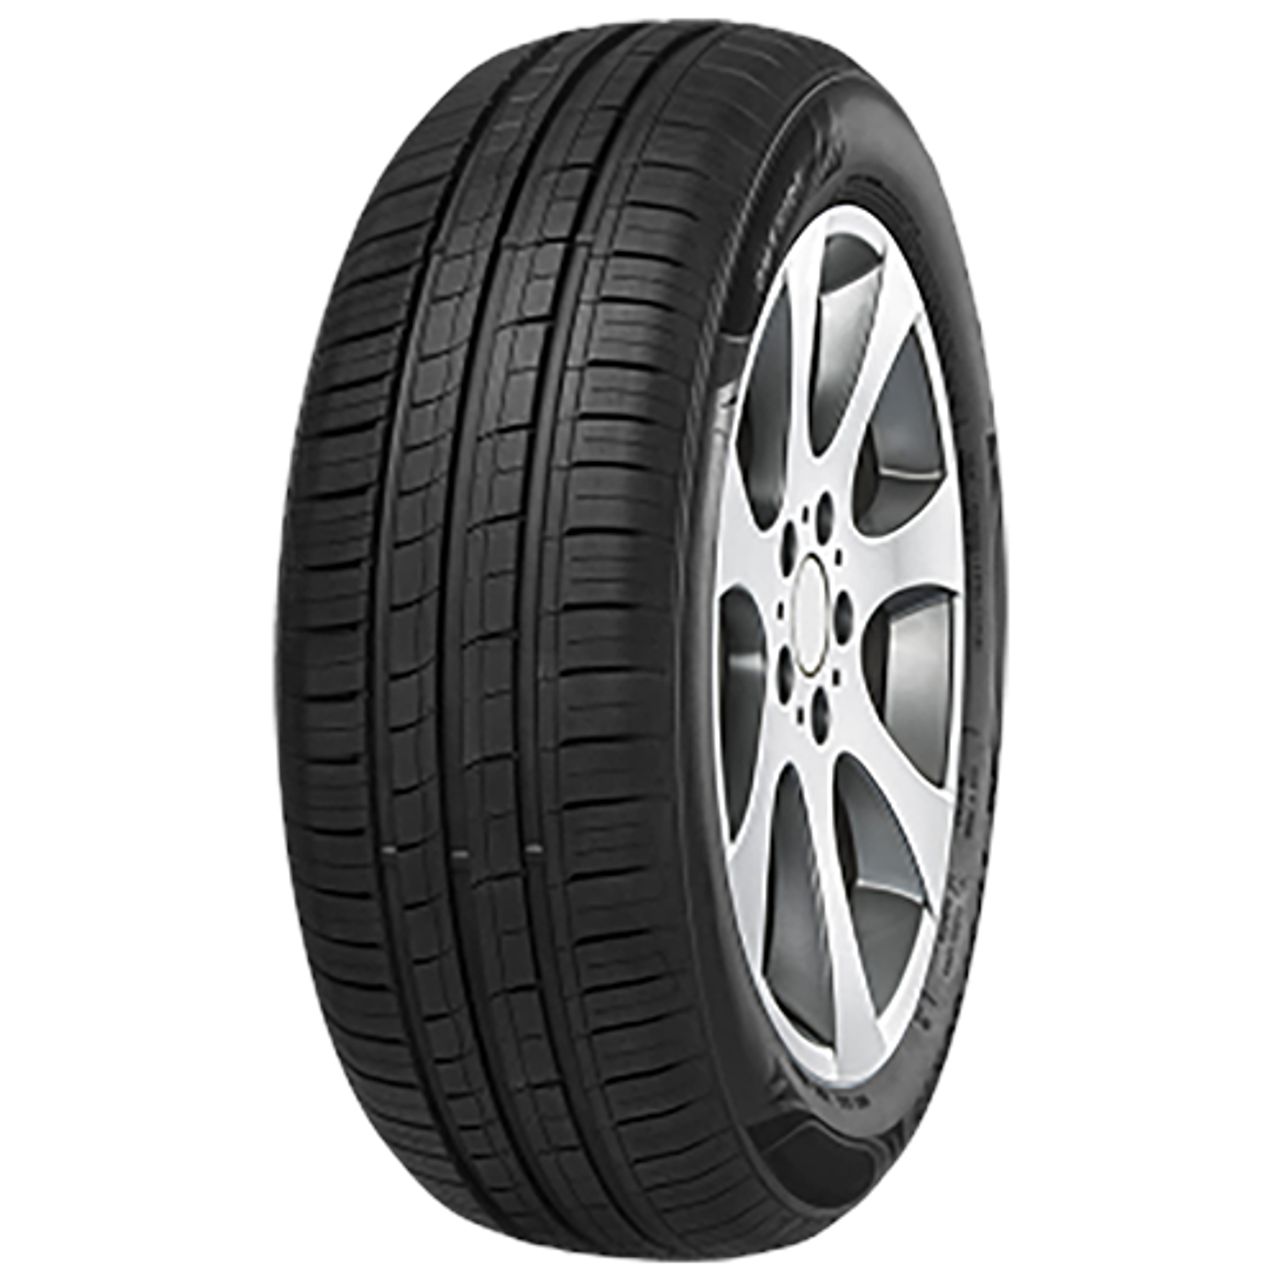 IMPERIAL ECODRIVER 4 195/65R14 89H 